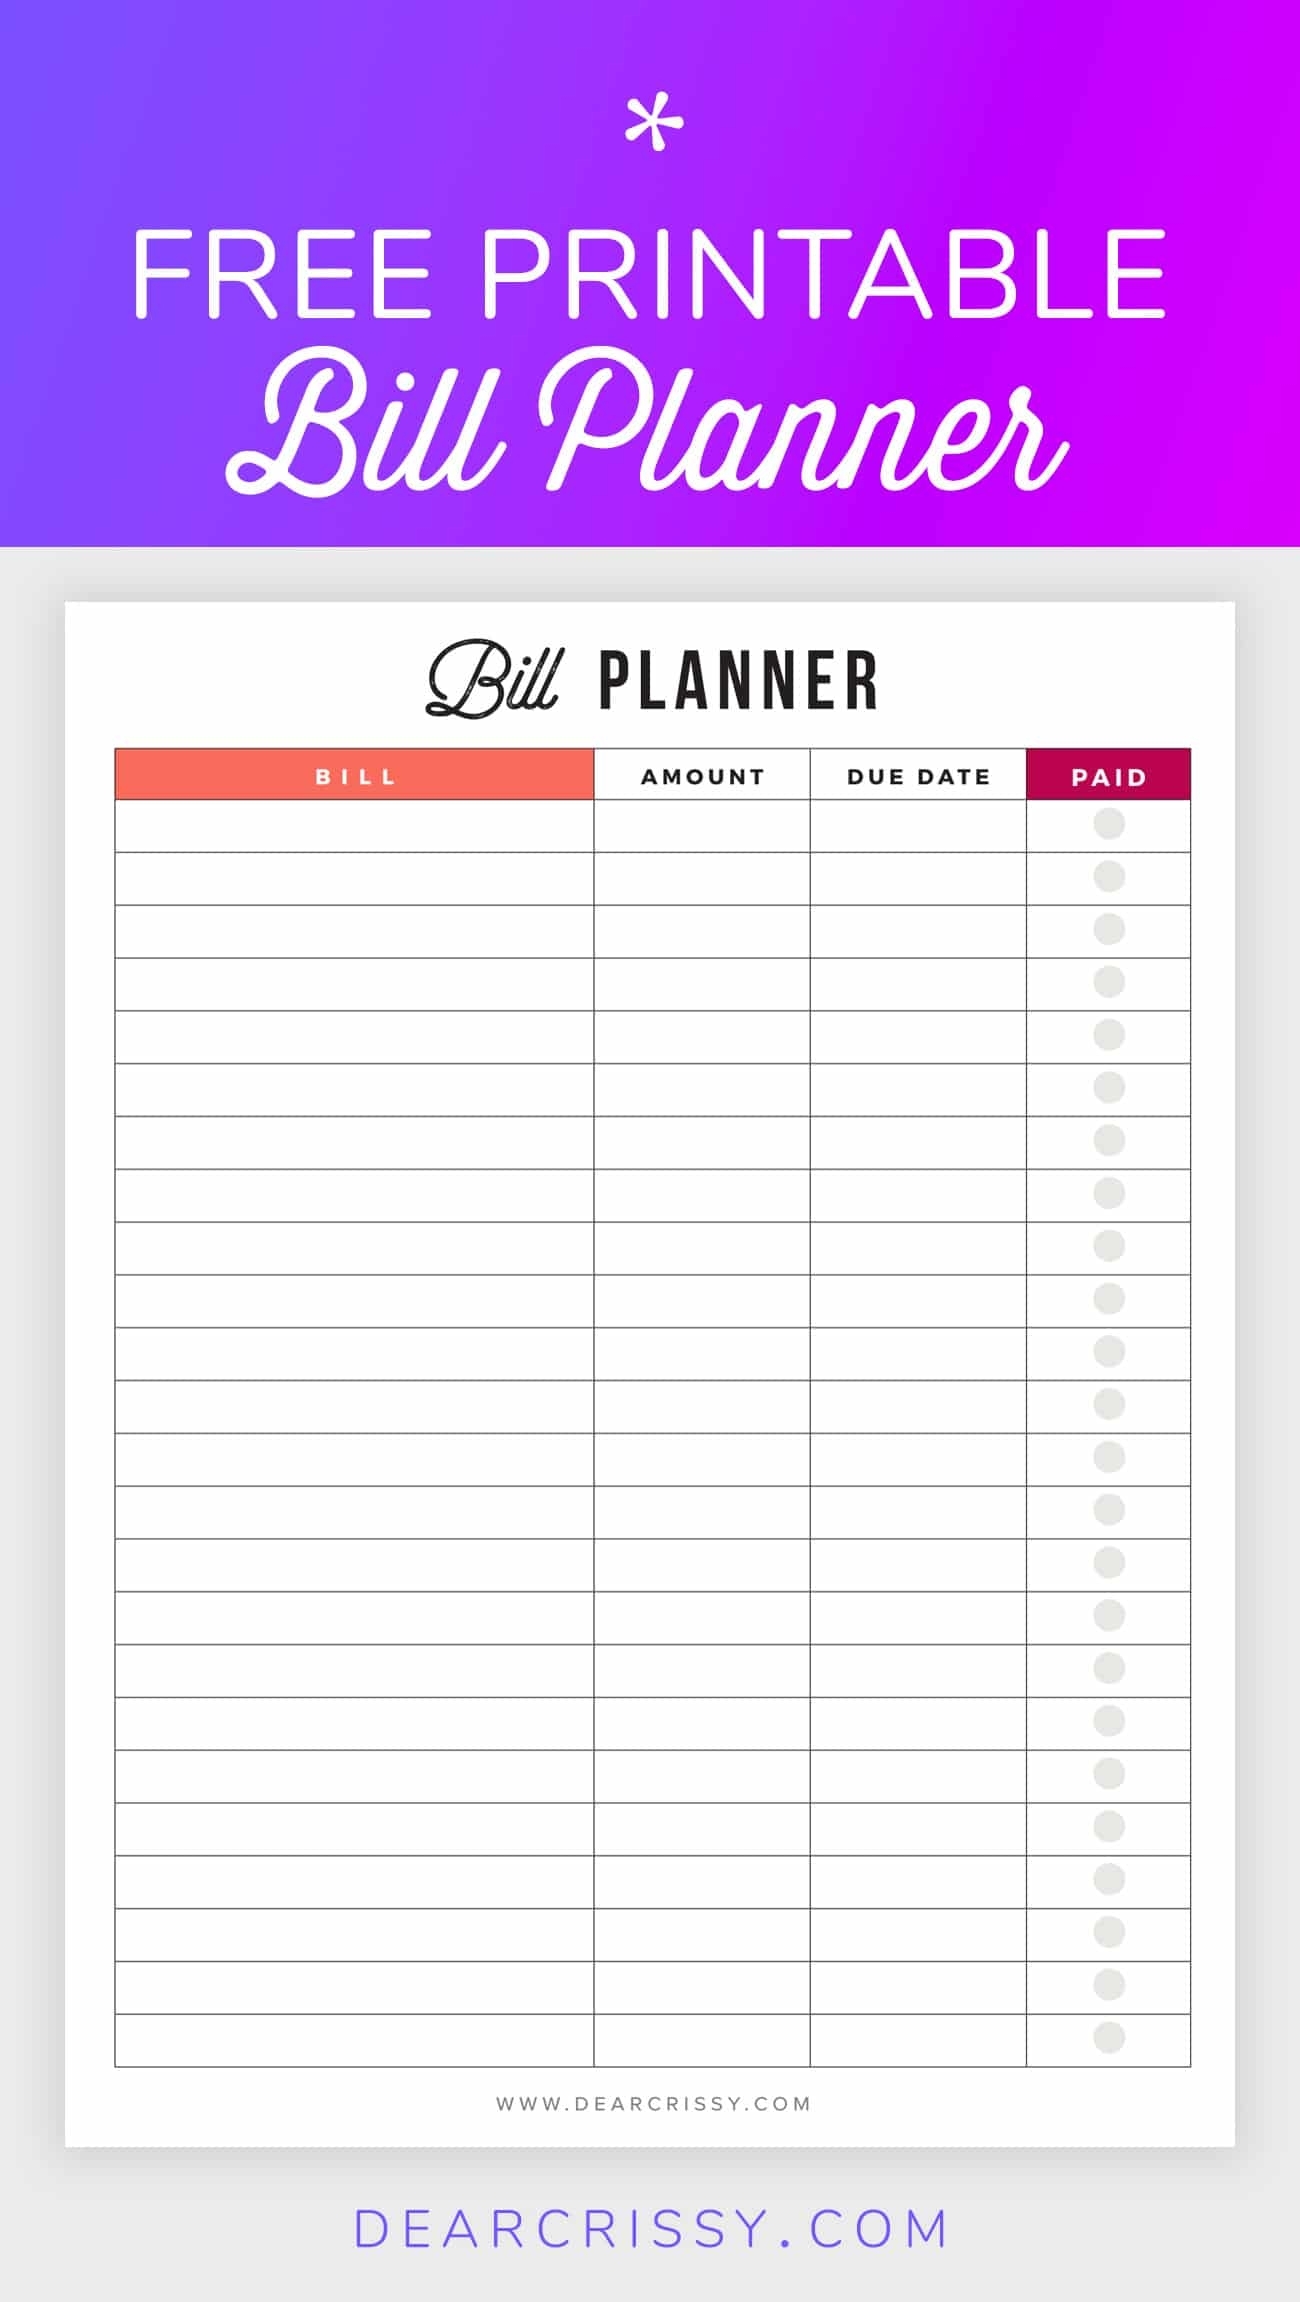 Bill Planner Printable - Pay Down Your Bills This Year! pertaining to Free Printable Monthly Bill Tracker